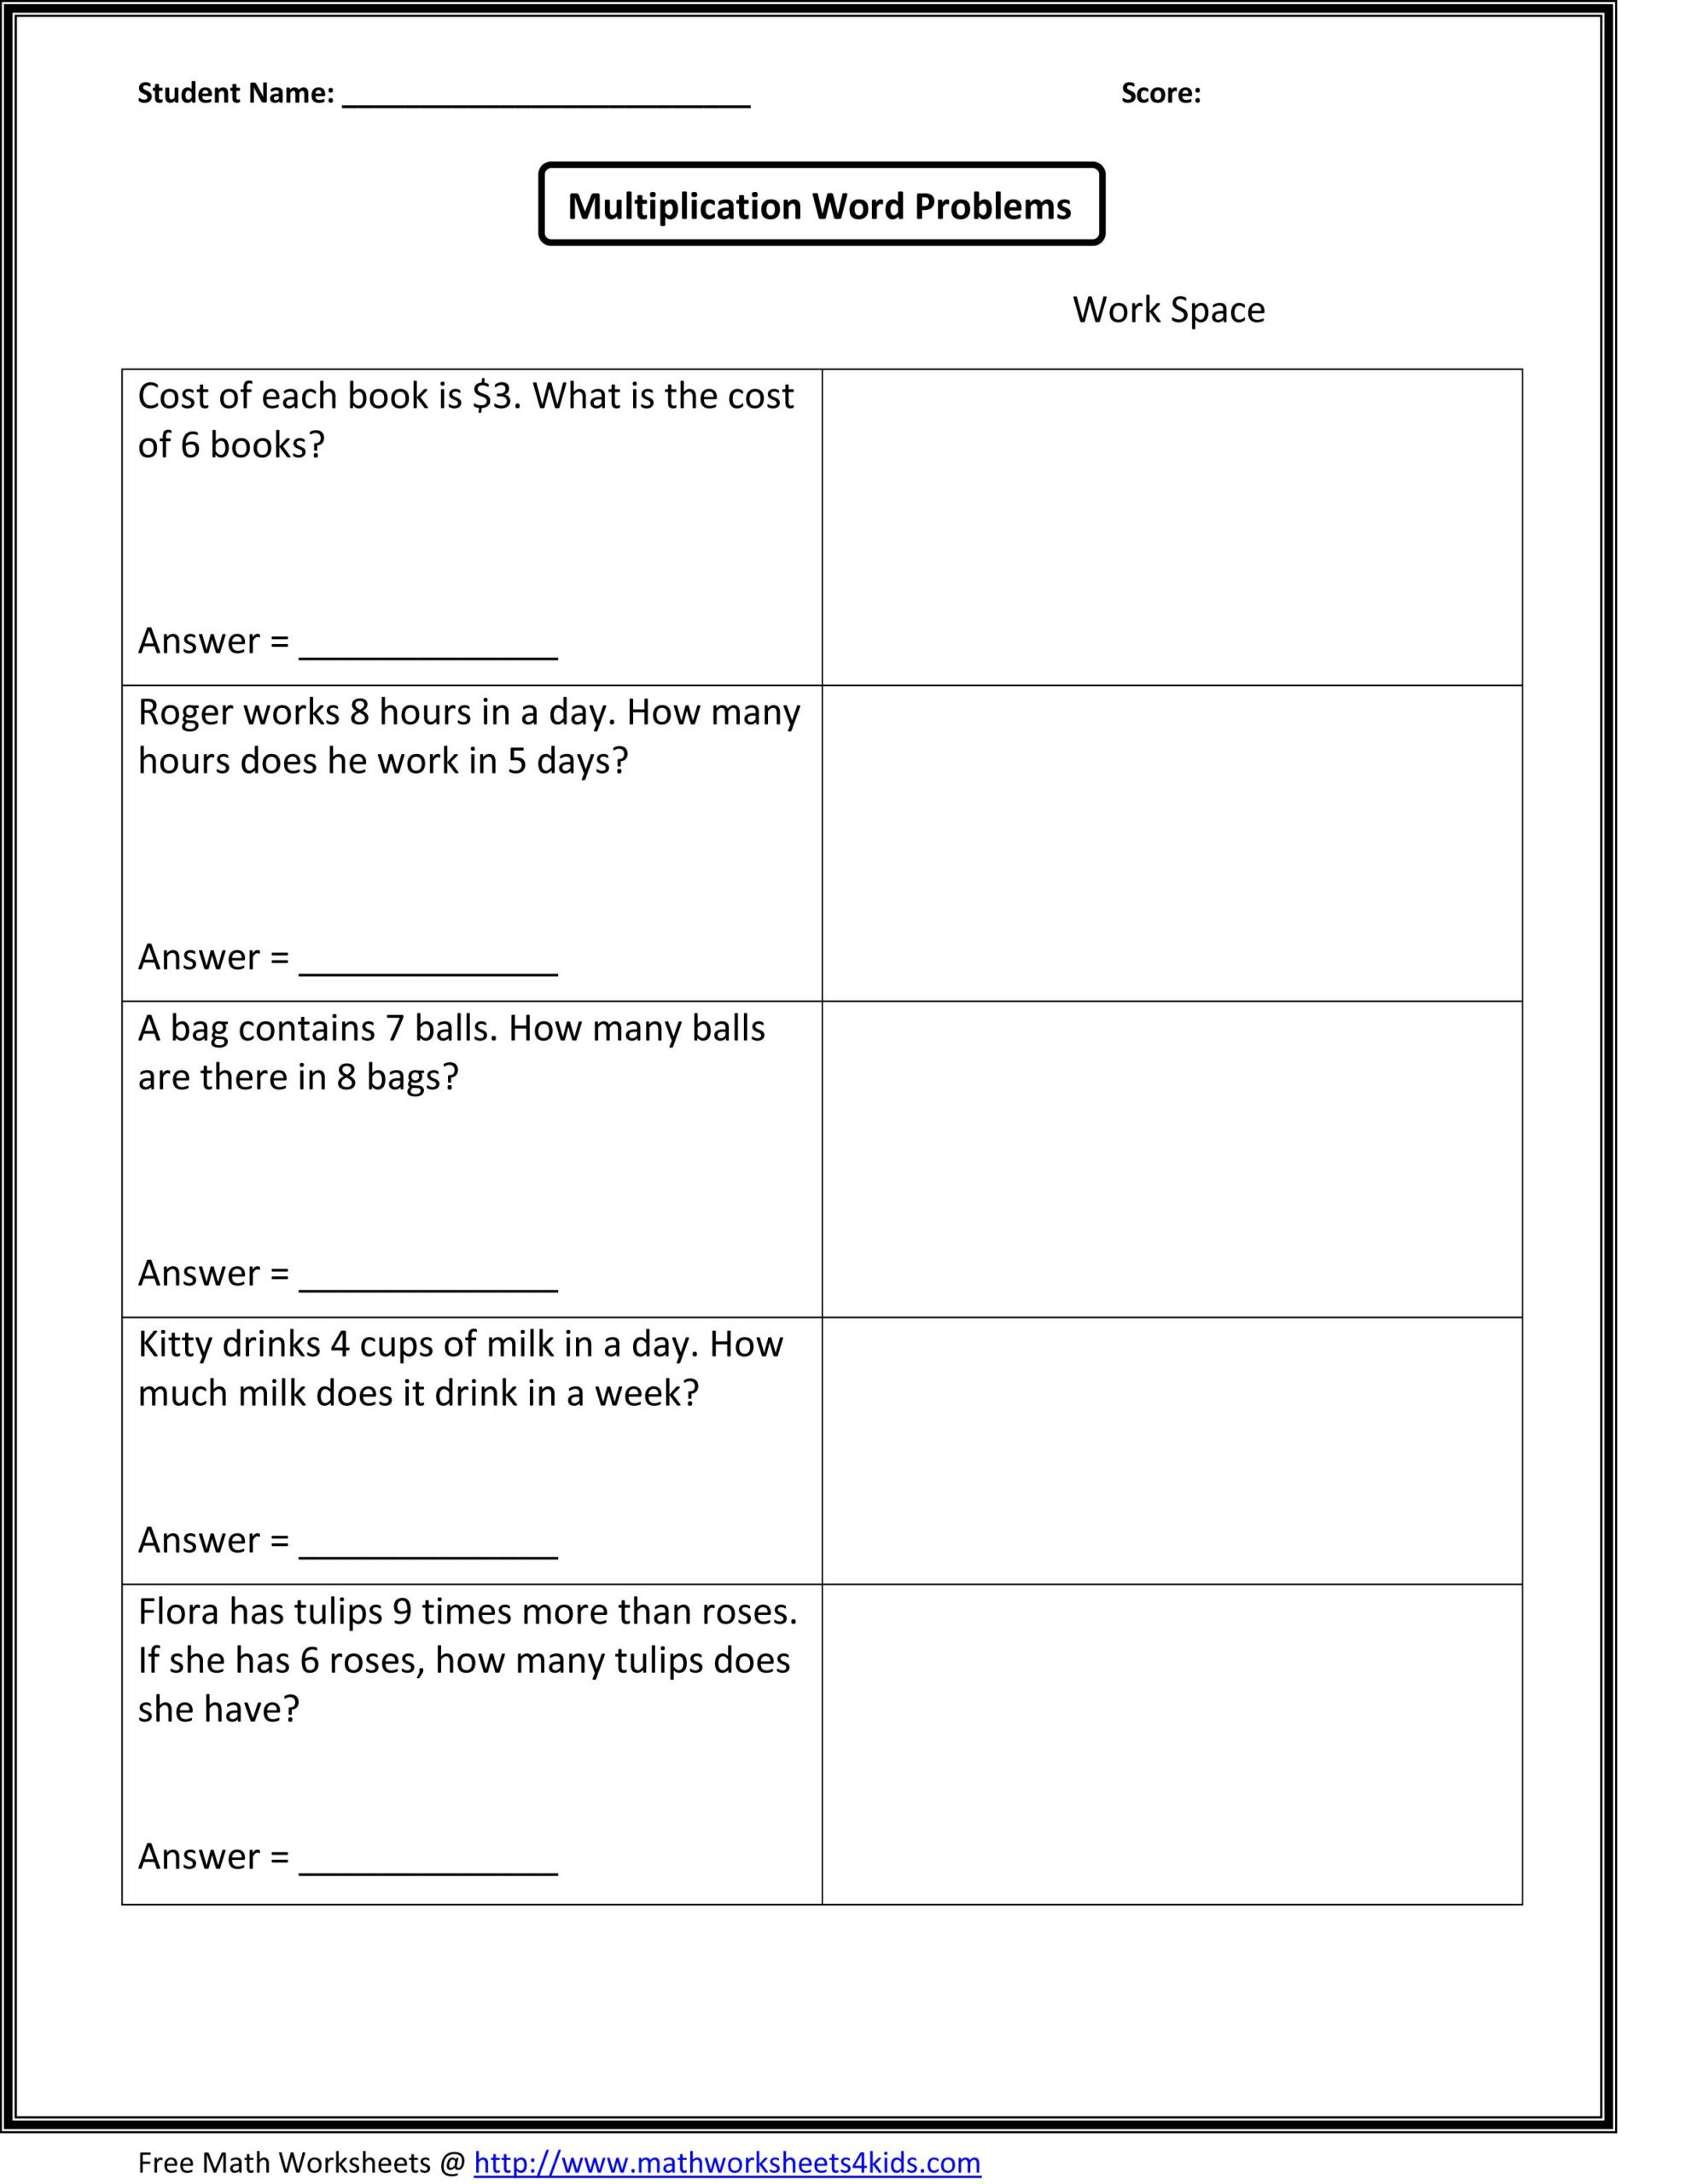 Linear Equation Word Problems Worksheet Math Worksheets by Grade and Subject Matter with 3rd